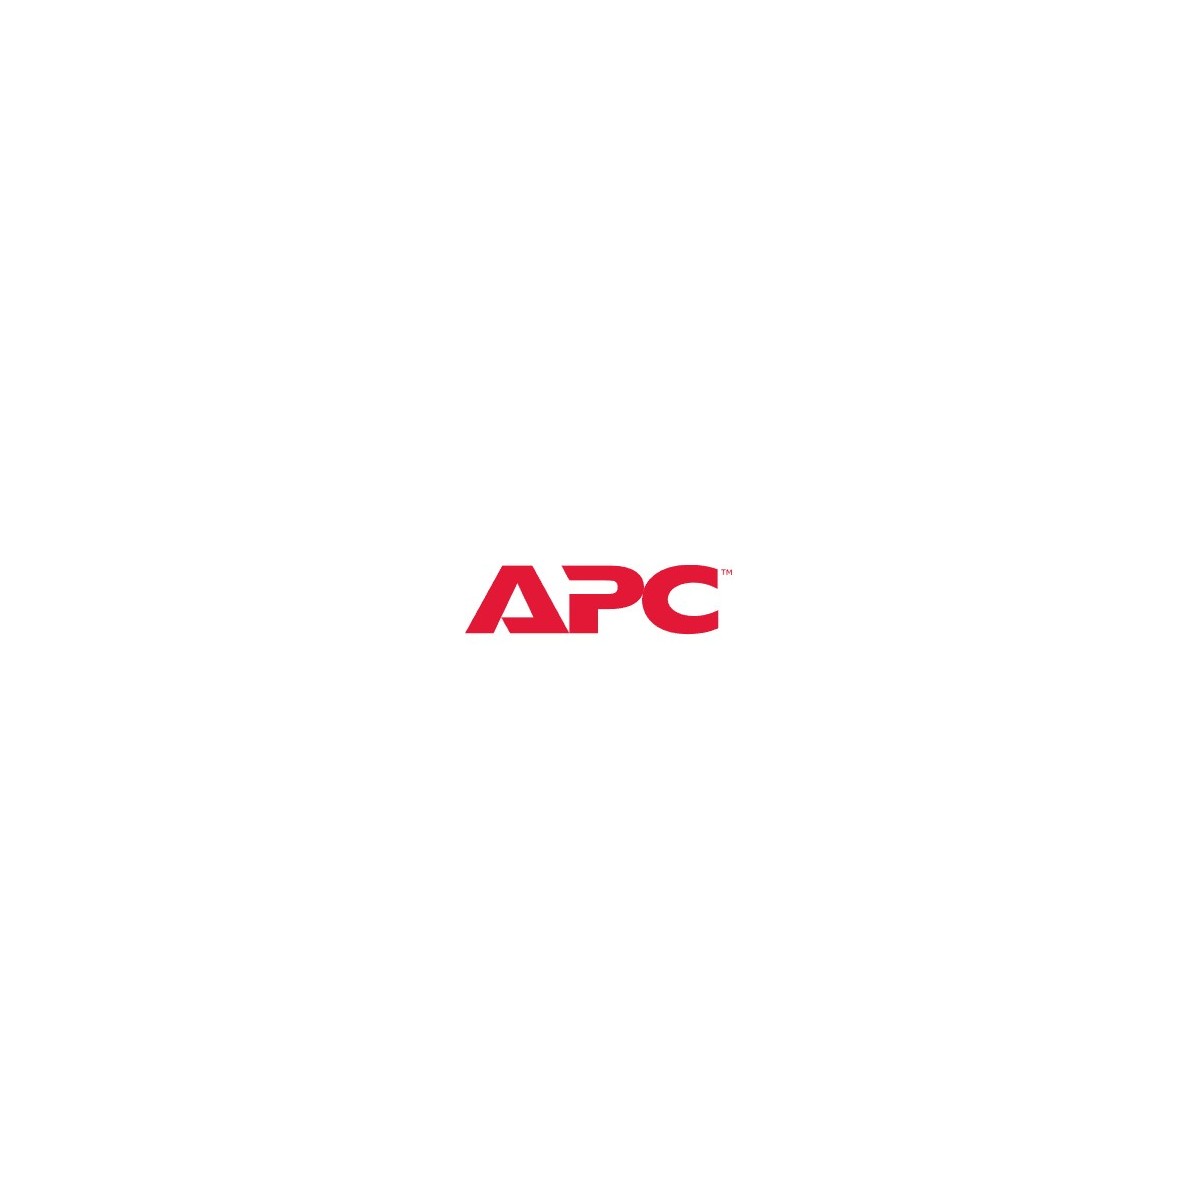 APC 5x8 Scheduled Assembly of 1-3